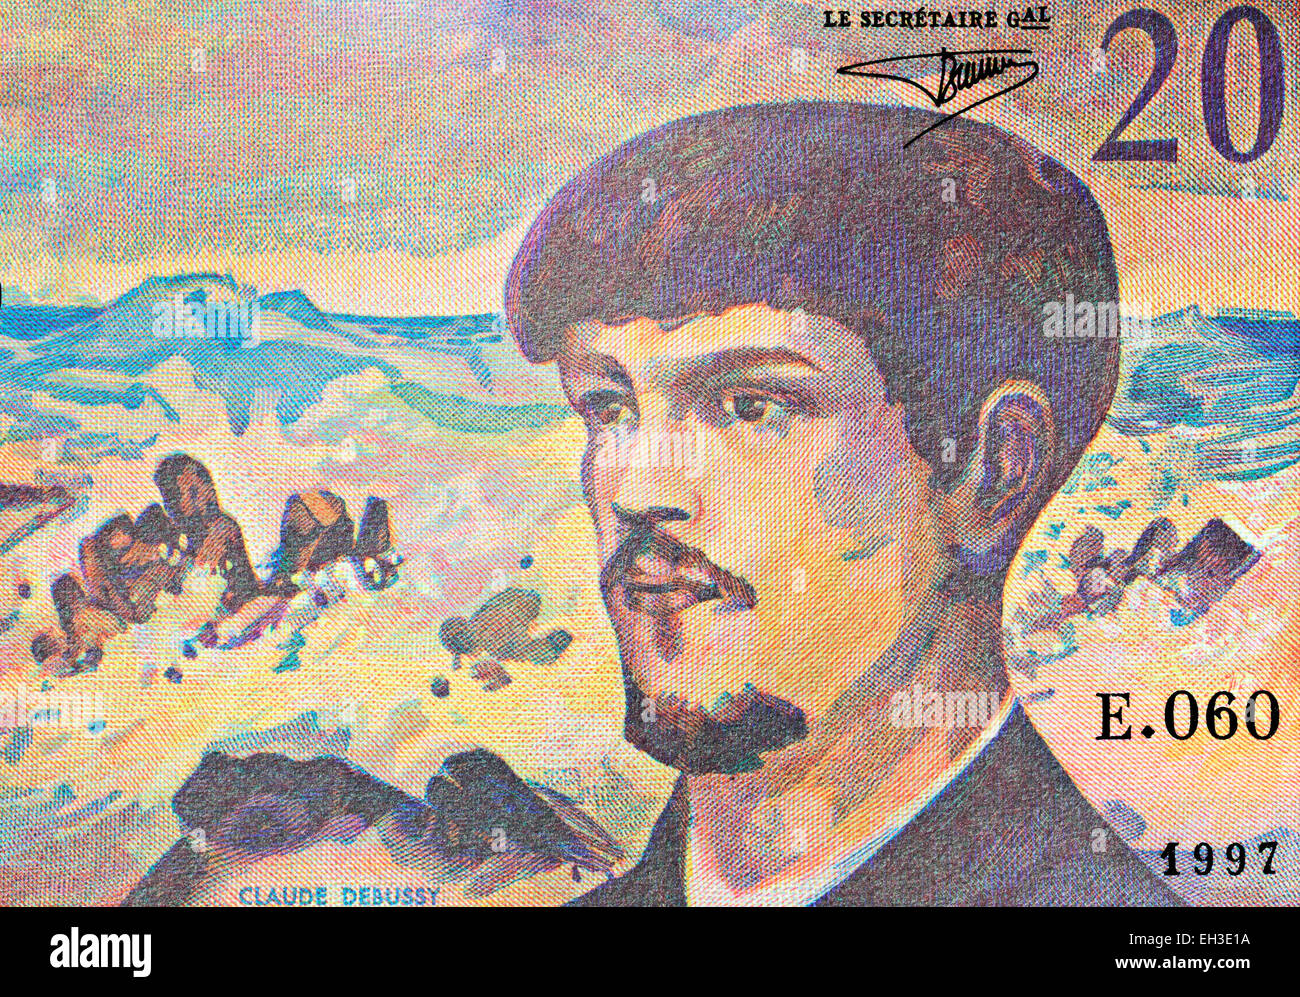 Composer Claude Debussy from 20 francs banknote, France, 1997 Stock Photo